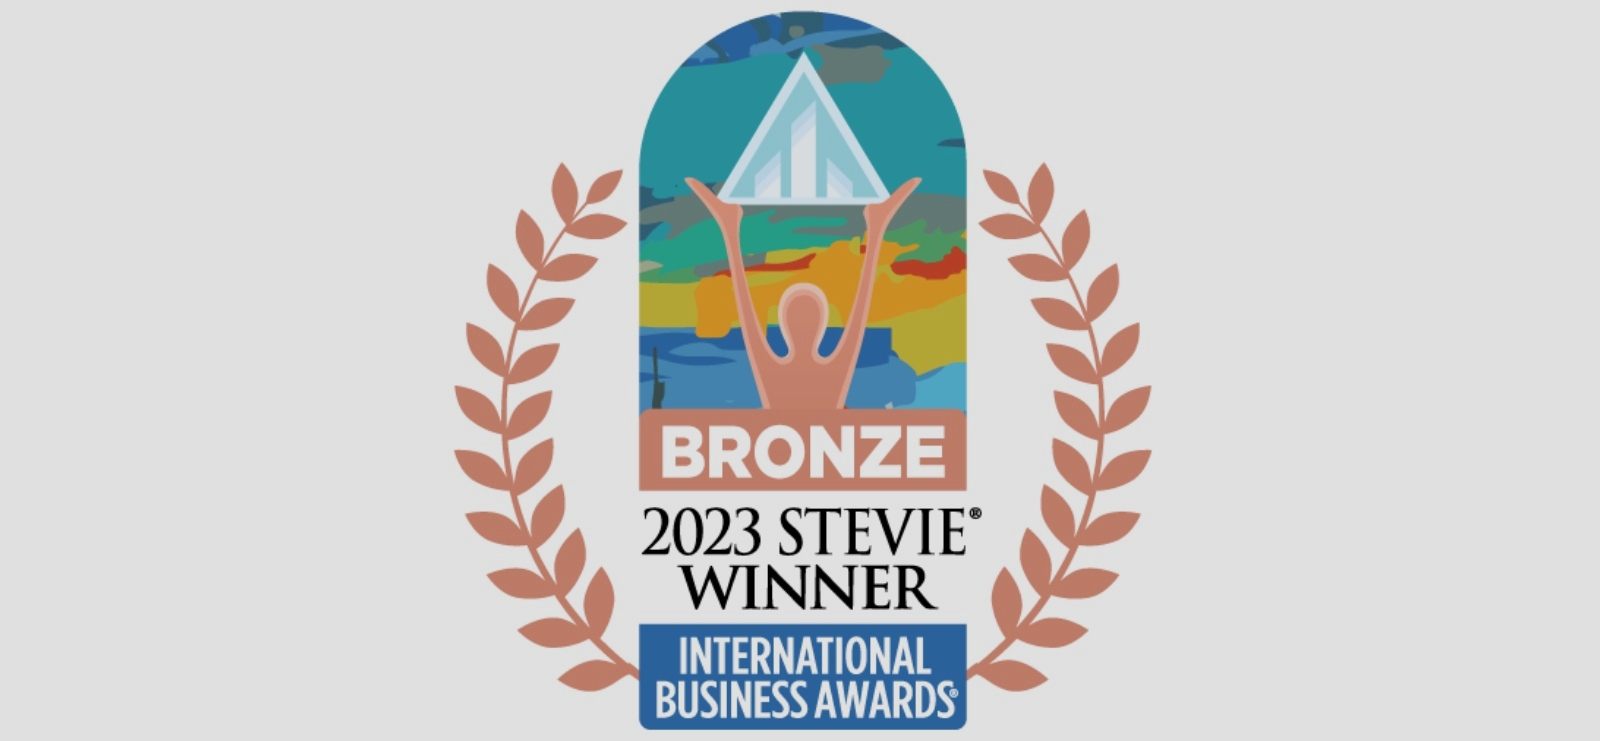 Bronze award to IC Holding from Stevie Awards, the Oscar of the business world